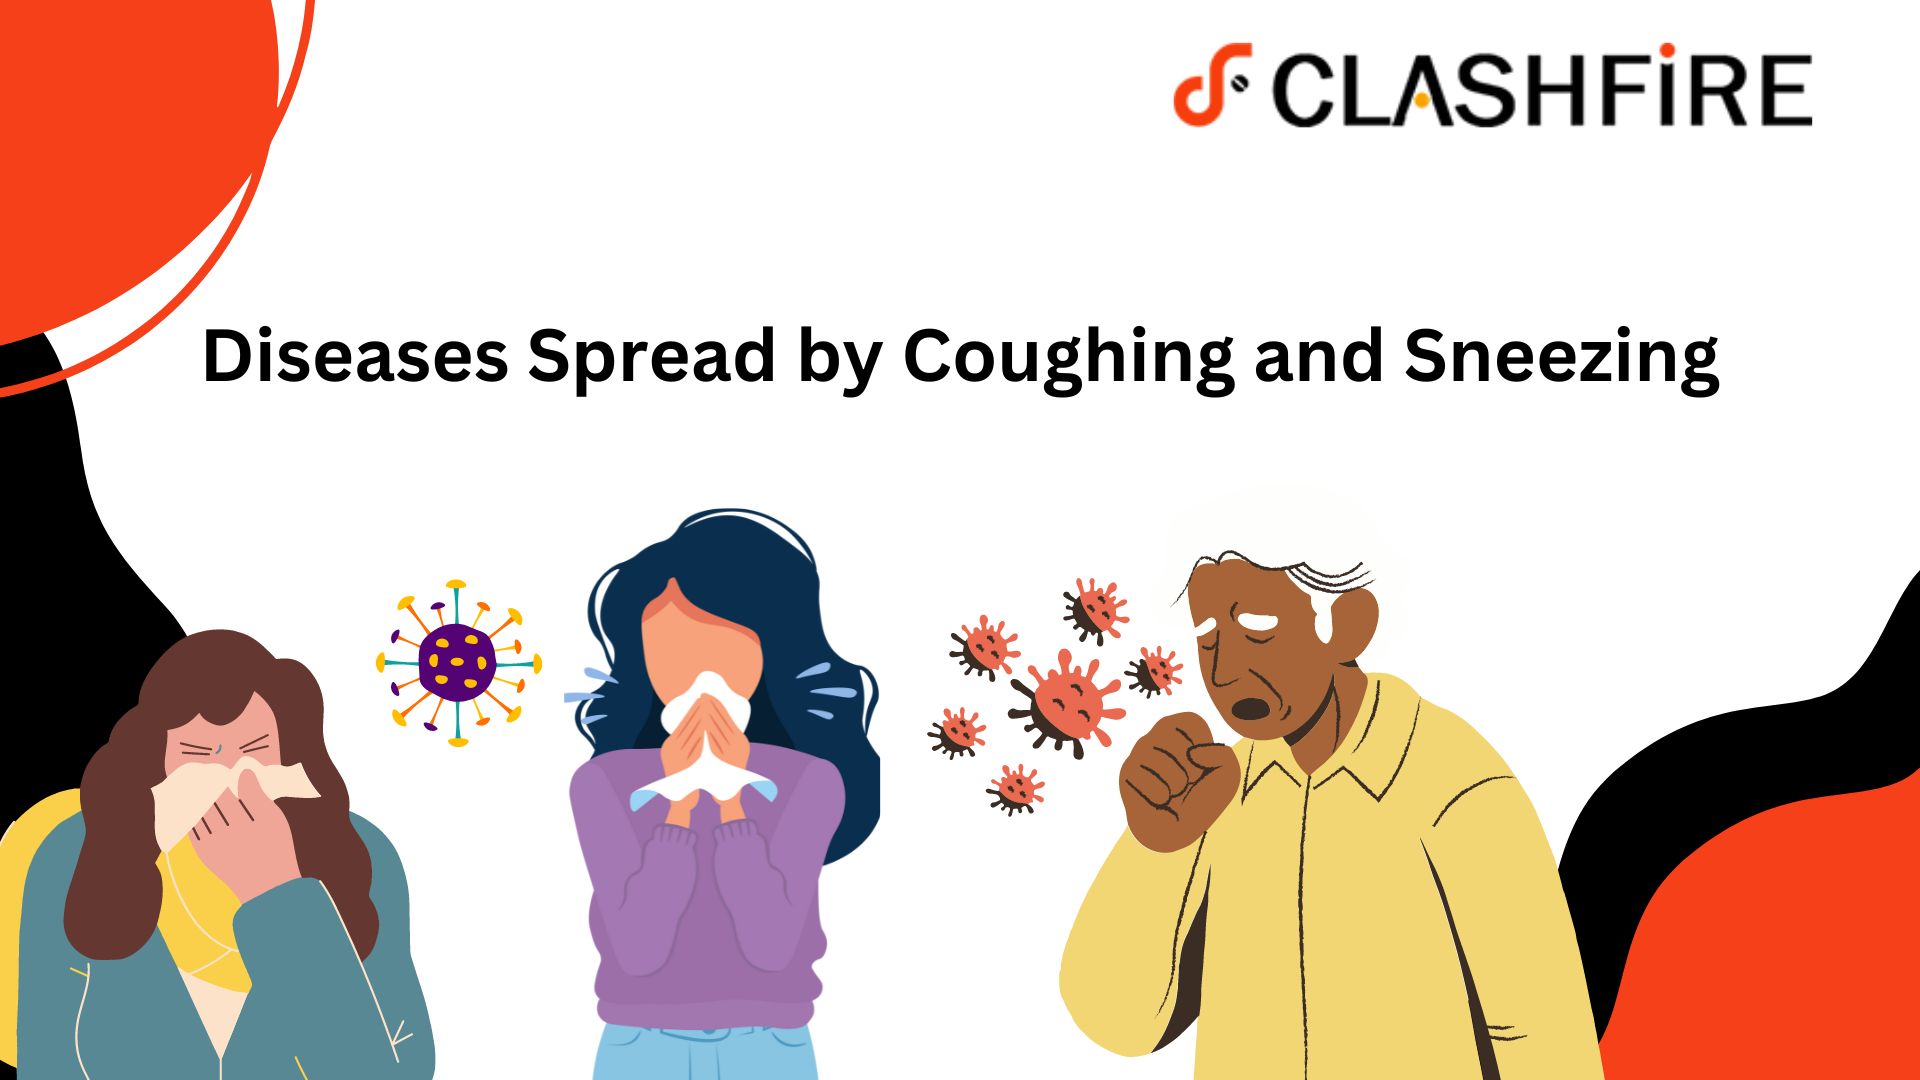 Diseases Spread by Coughing and Sneezing